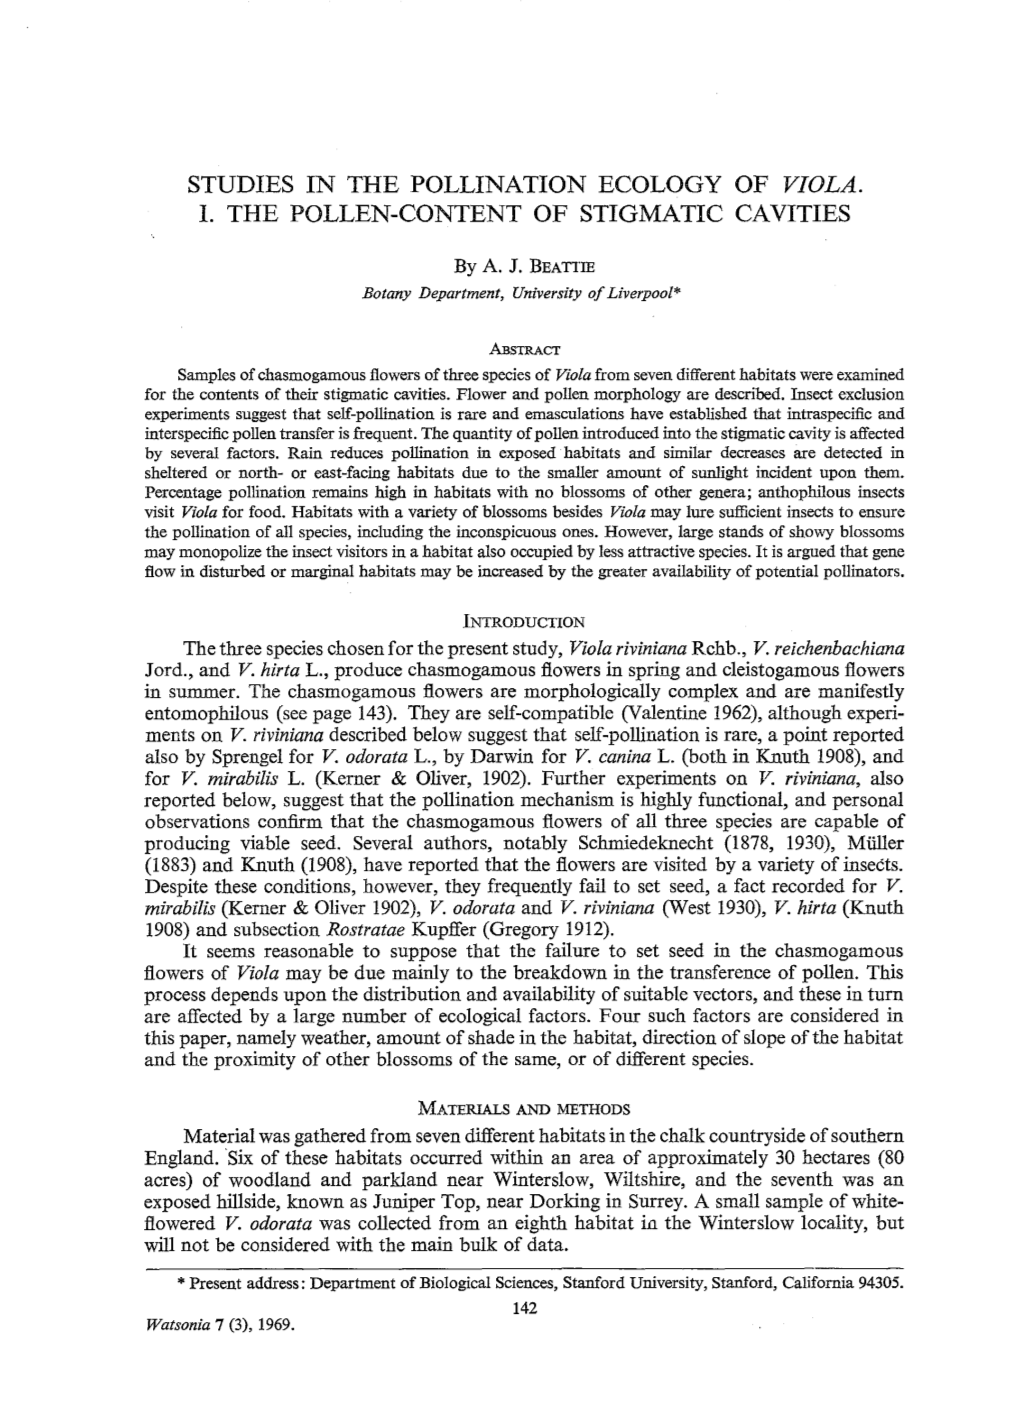 Studies in the Pollination Ecology of Viola. 1. the Pollen-Content of Stigmatic Cavities